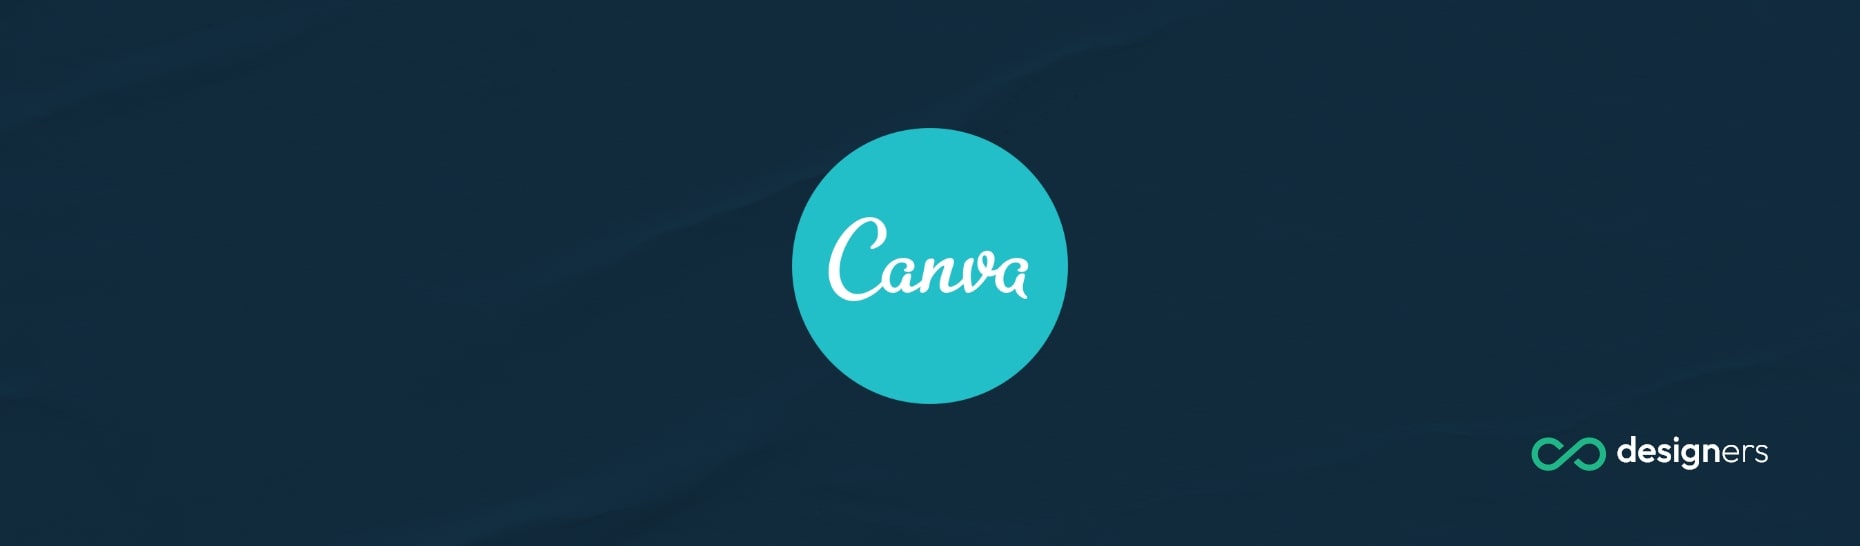 What Does Canva Use to Ship?